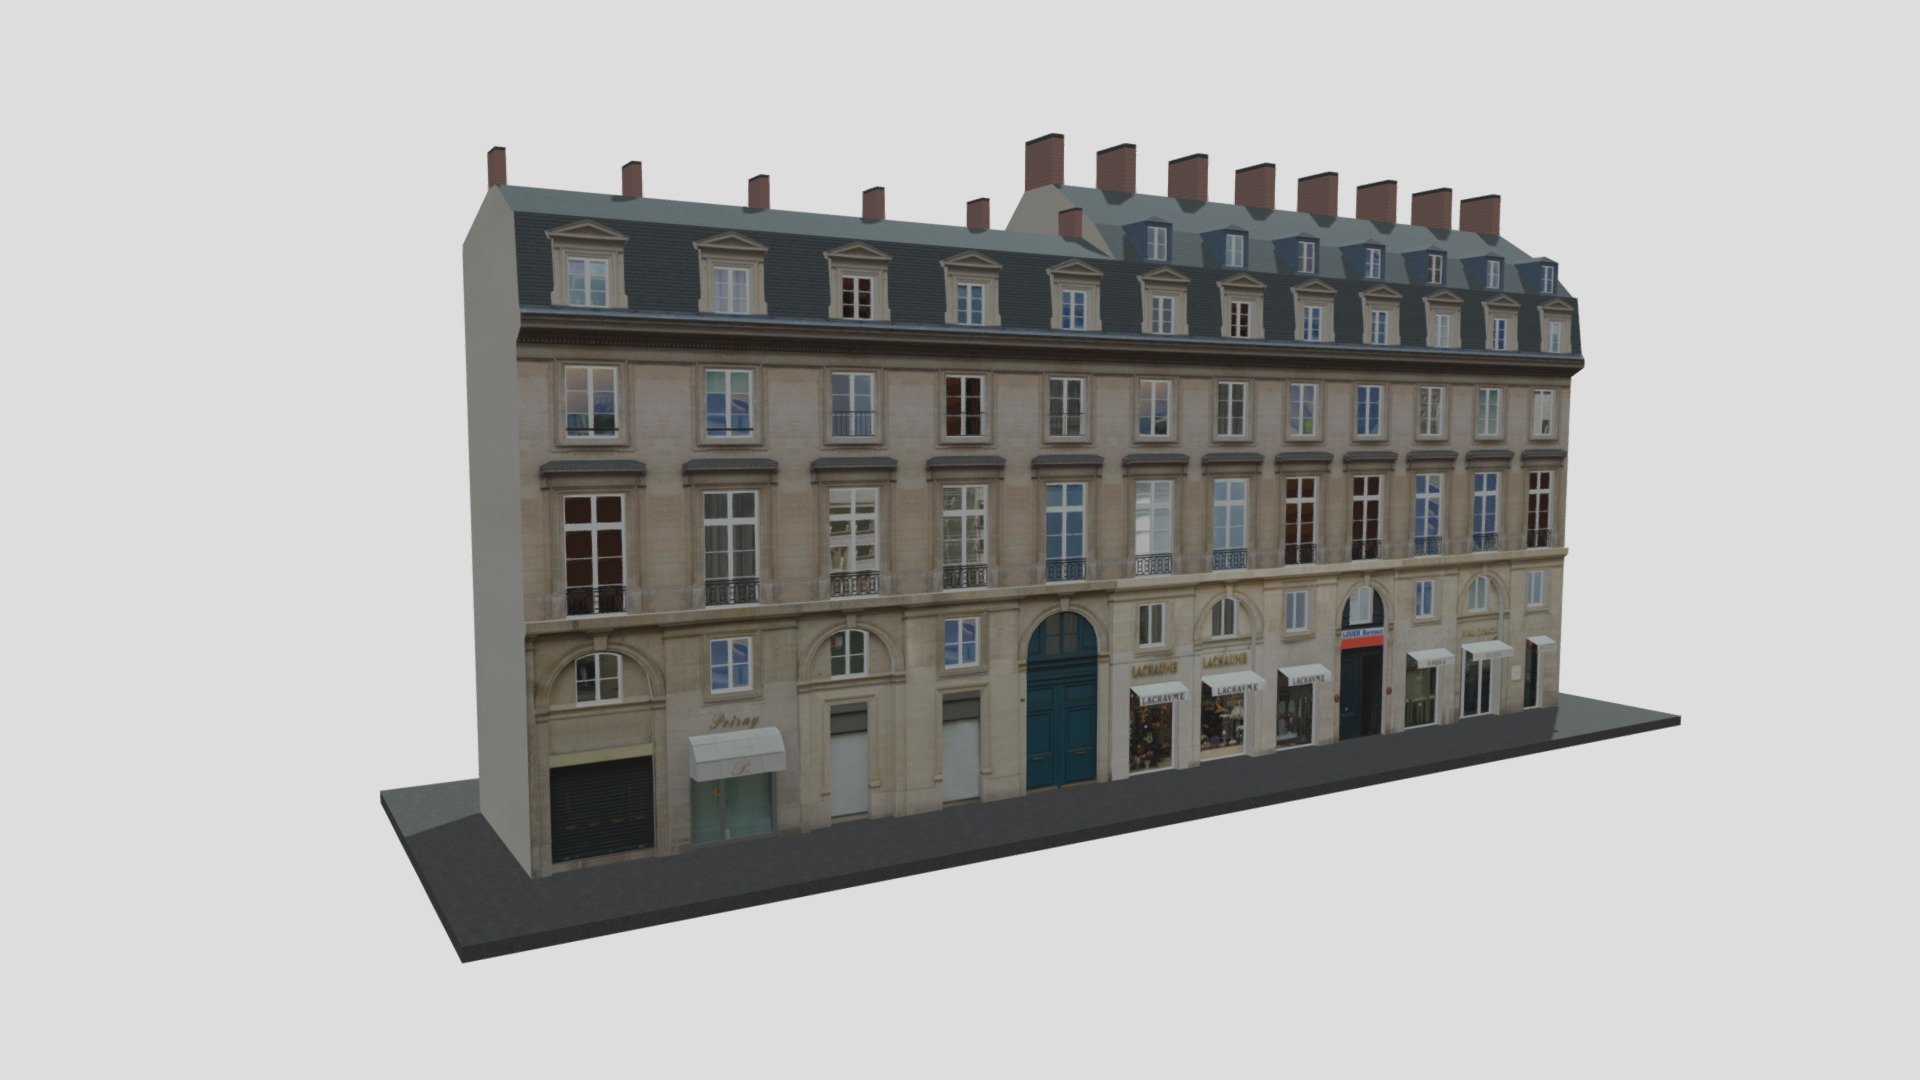 Paris Corner Apartment Building 10

Originally created with 3ds Max 2015 and rendered in V-Ray 3.0.

Total Poly Counts:
Poly Count = 18336
Vertex Count = 21923

https://nuralam3d.blogspot.com/2021/08/paris-corner-apartment-building-10.html - Paris Corner Apartment Building 10 - 3D model by nuralam018 3d model